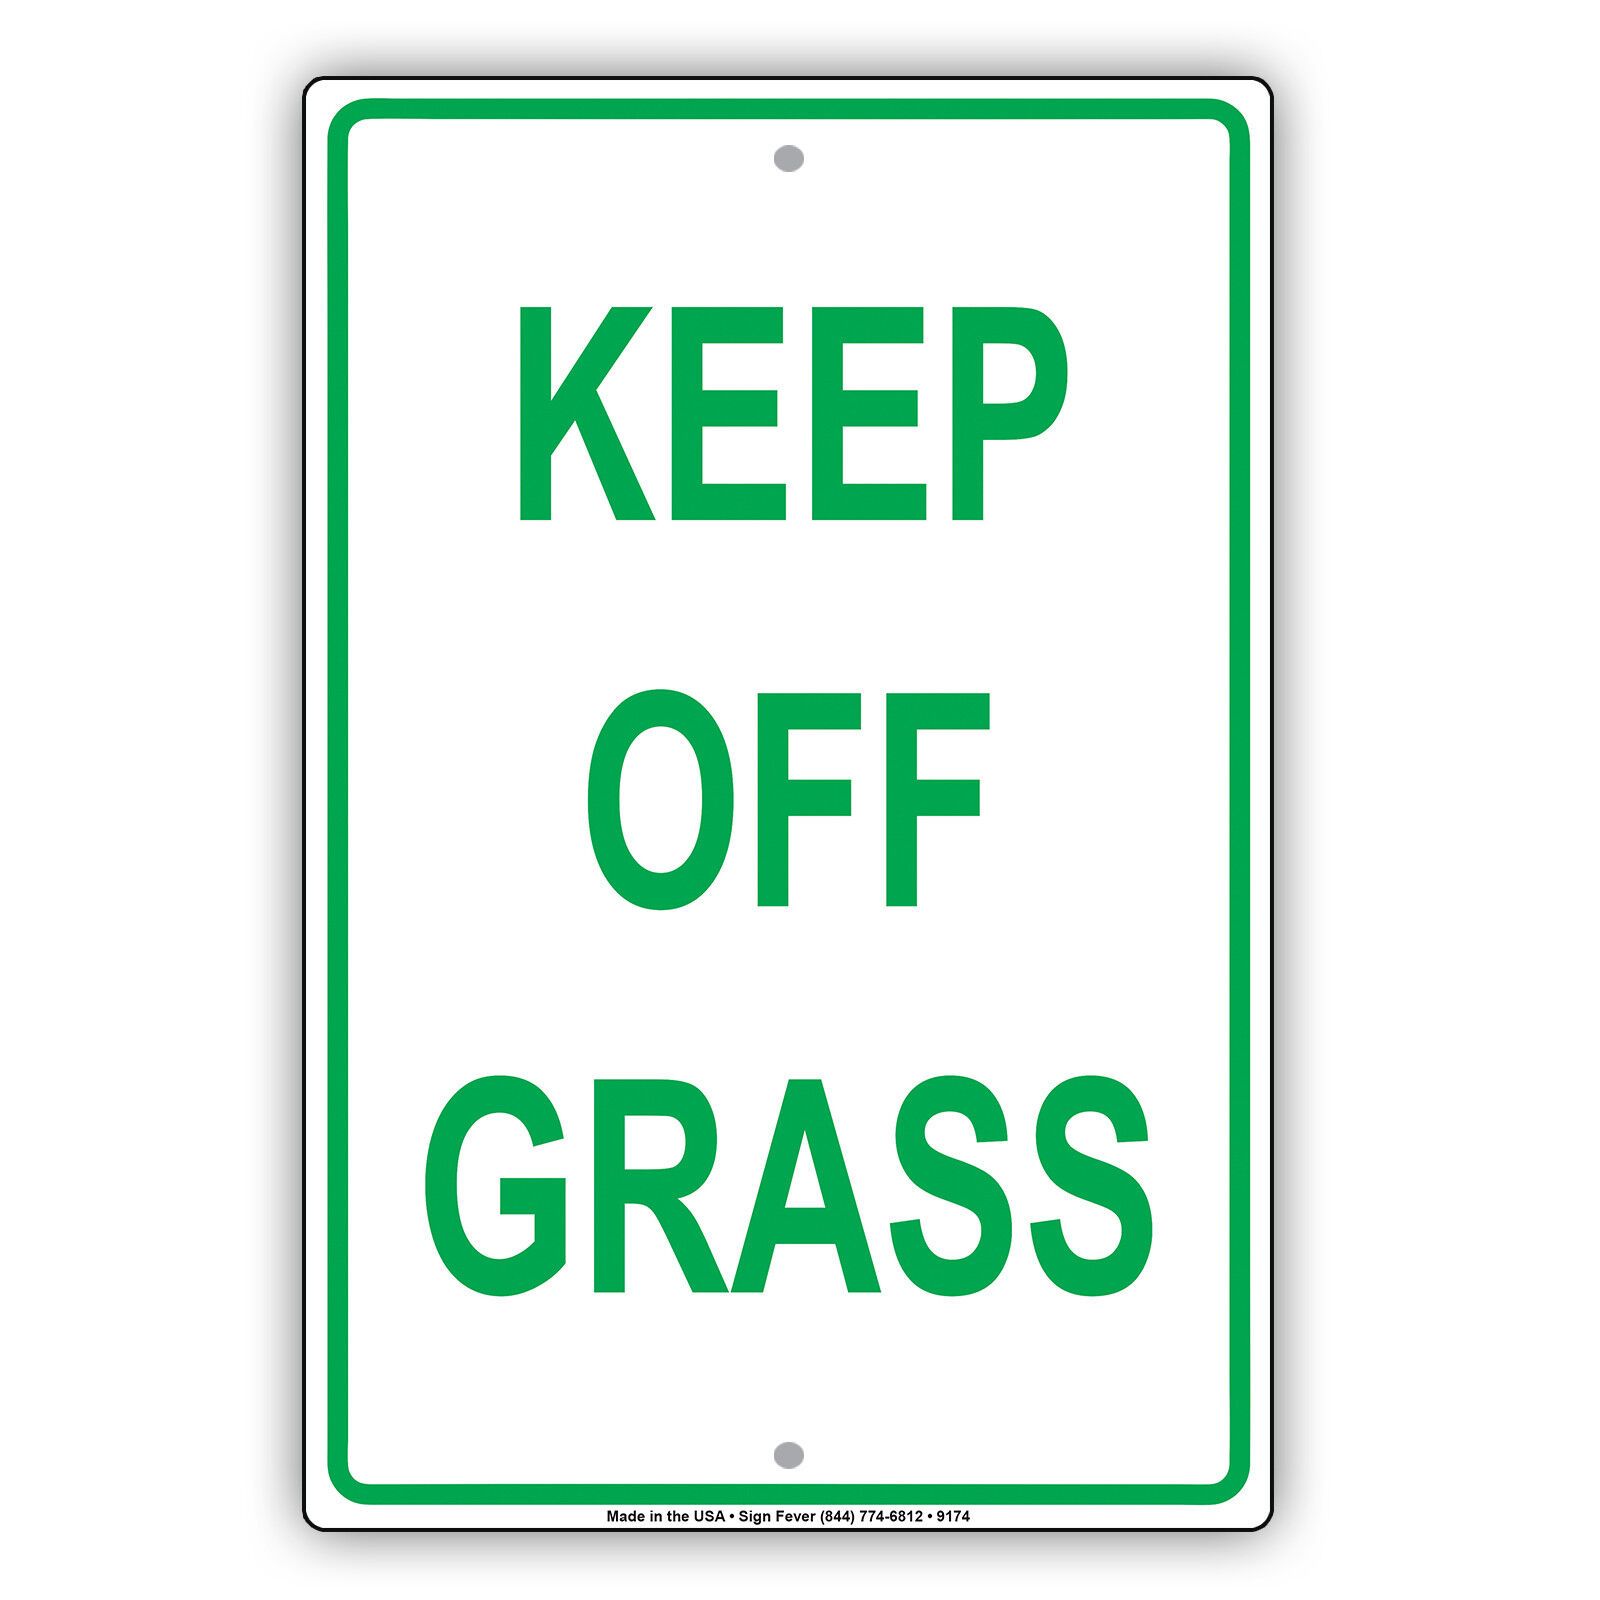 Keep Off Grass Wall Art Decor Novelty Notice Caution Aluminum Metal Sign |  Ebay With Regard To Most Up To Date Metal Sign Stake Wall Art (Gallery 12 of 20)